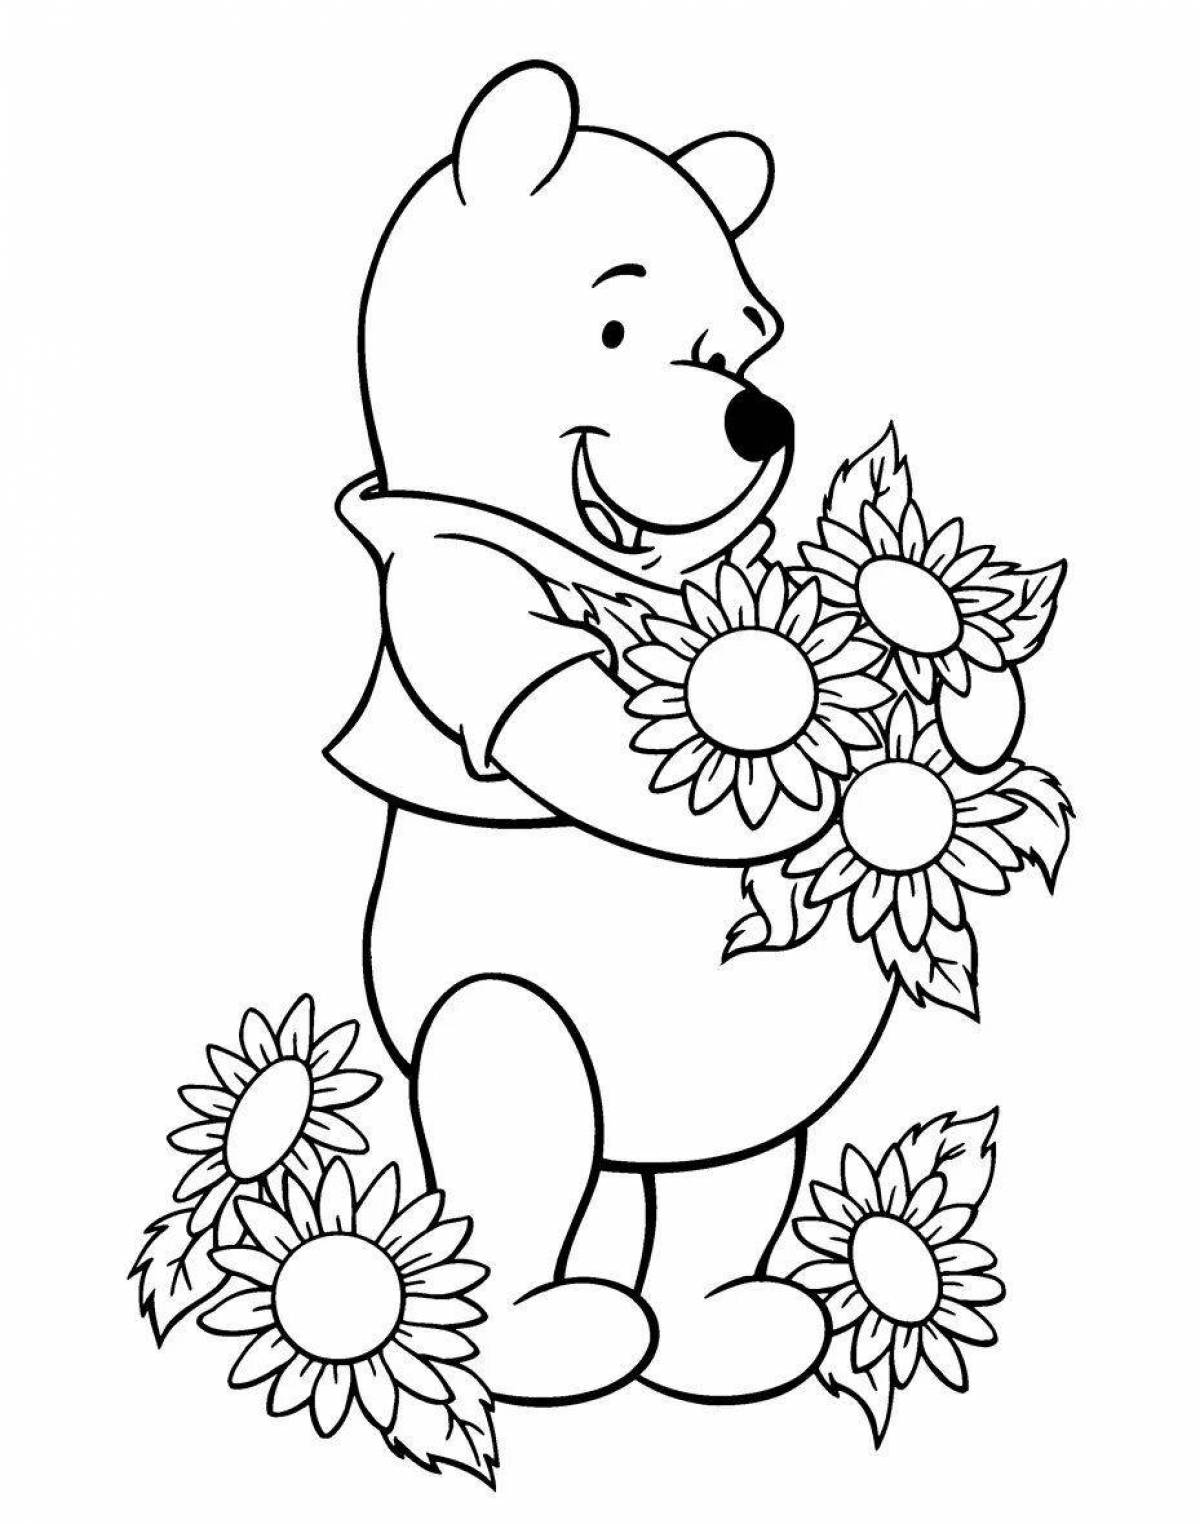 Adorable bear coloring book for children 6-7 years old